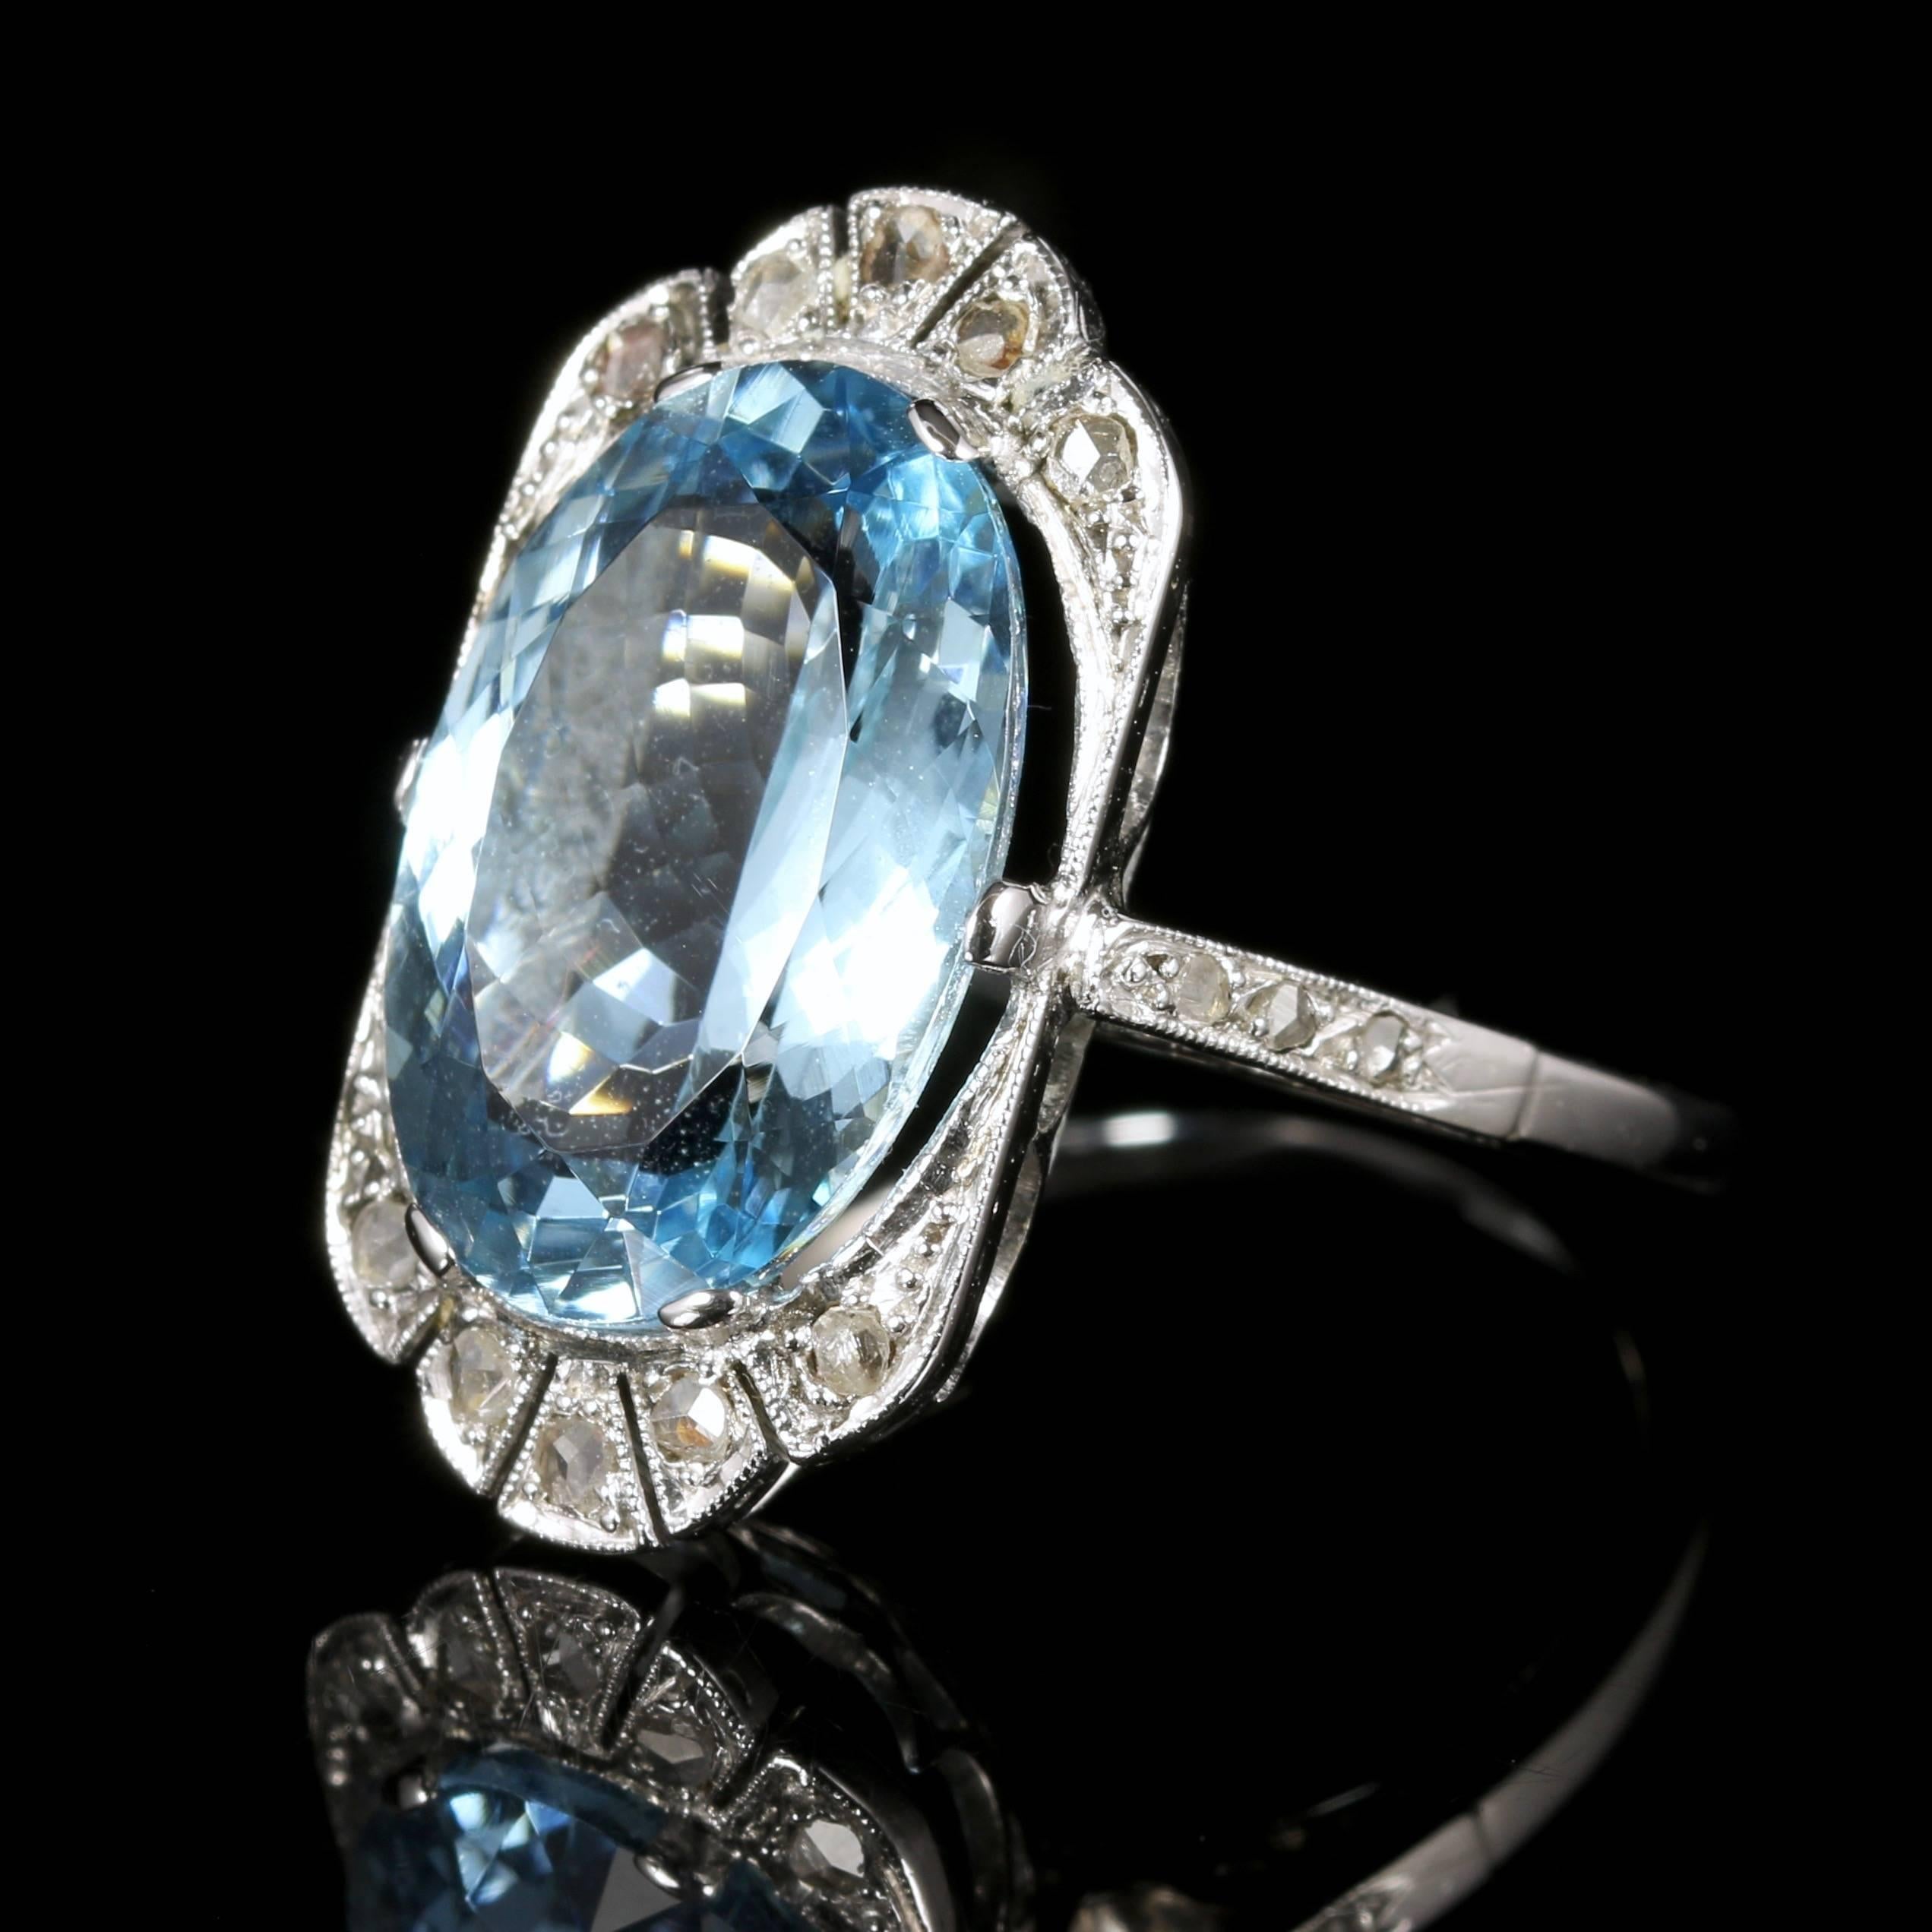 This Antique Edwardian beautiful Oval Old Cut Aquamarine and Diamond ring is lovely, set in 18ct white gold 

Circa 1915 

The Aquamarine is 7.80ct in size

A fabulous rich blue with flashes of inner green, this really is spectacular.

The large